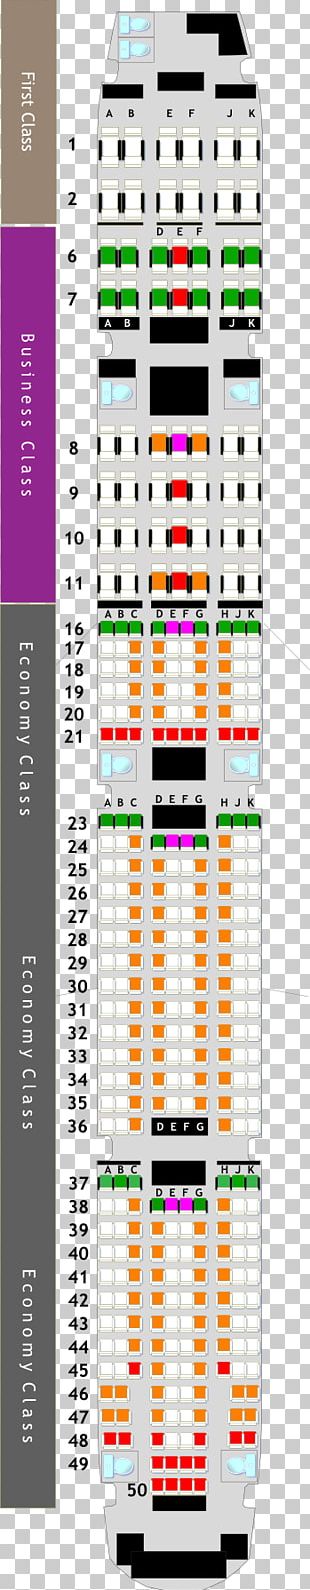 Seatguru Seat Map Philippine Airlines Boeing Er Images And